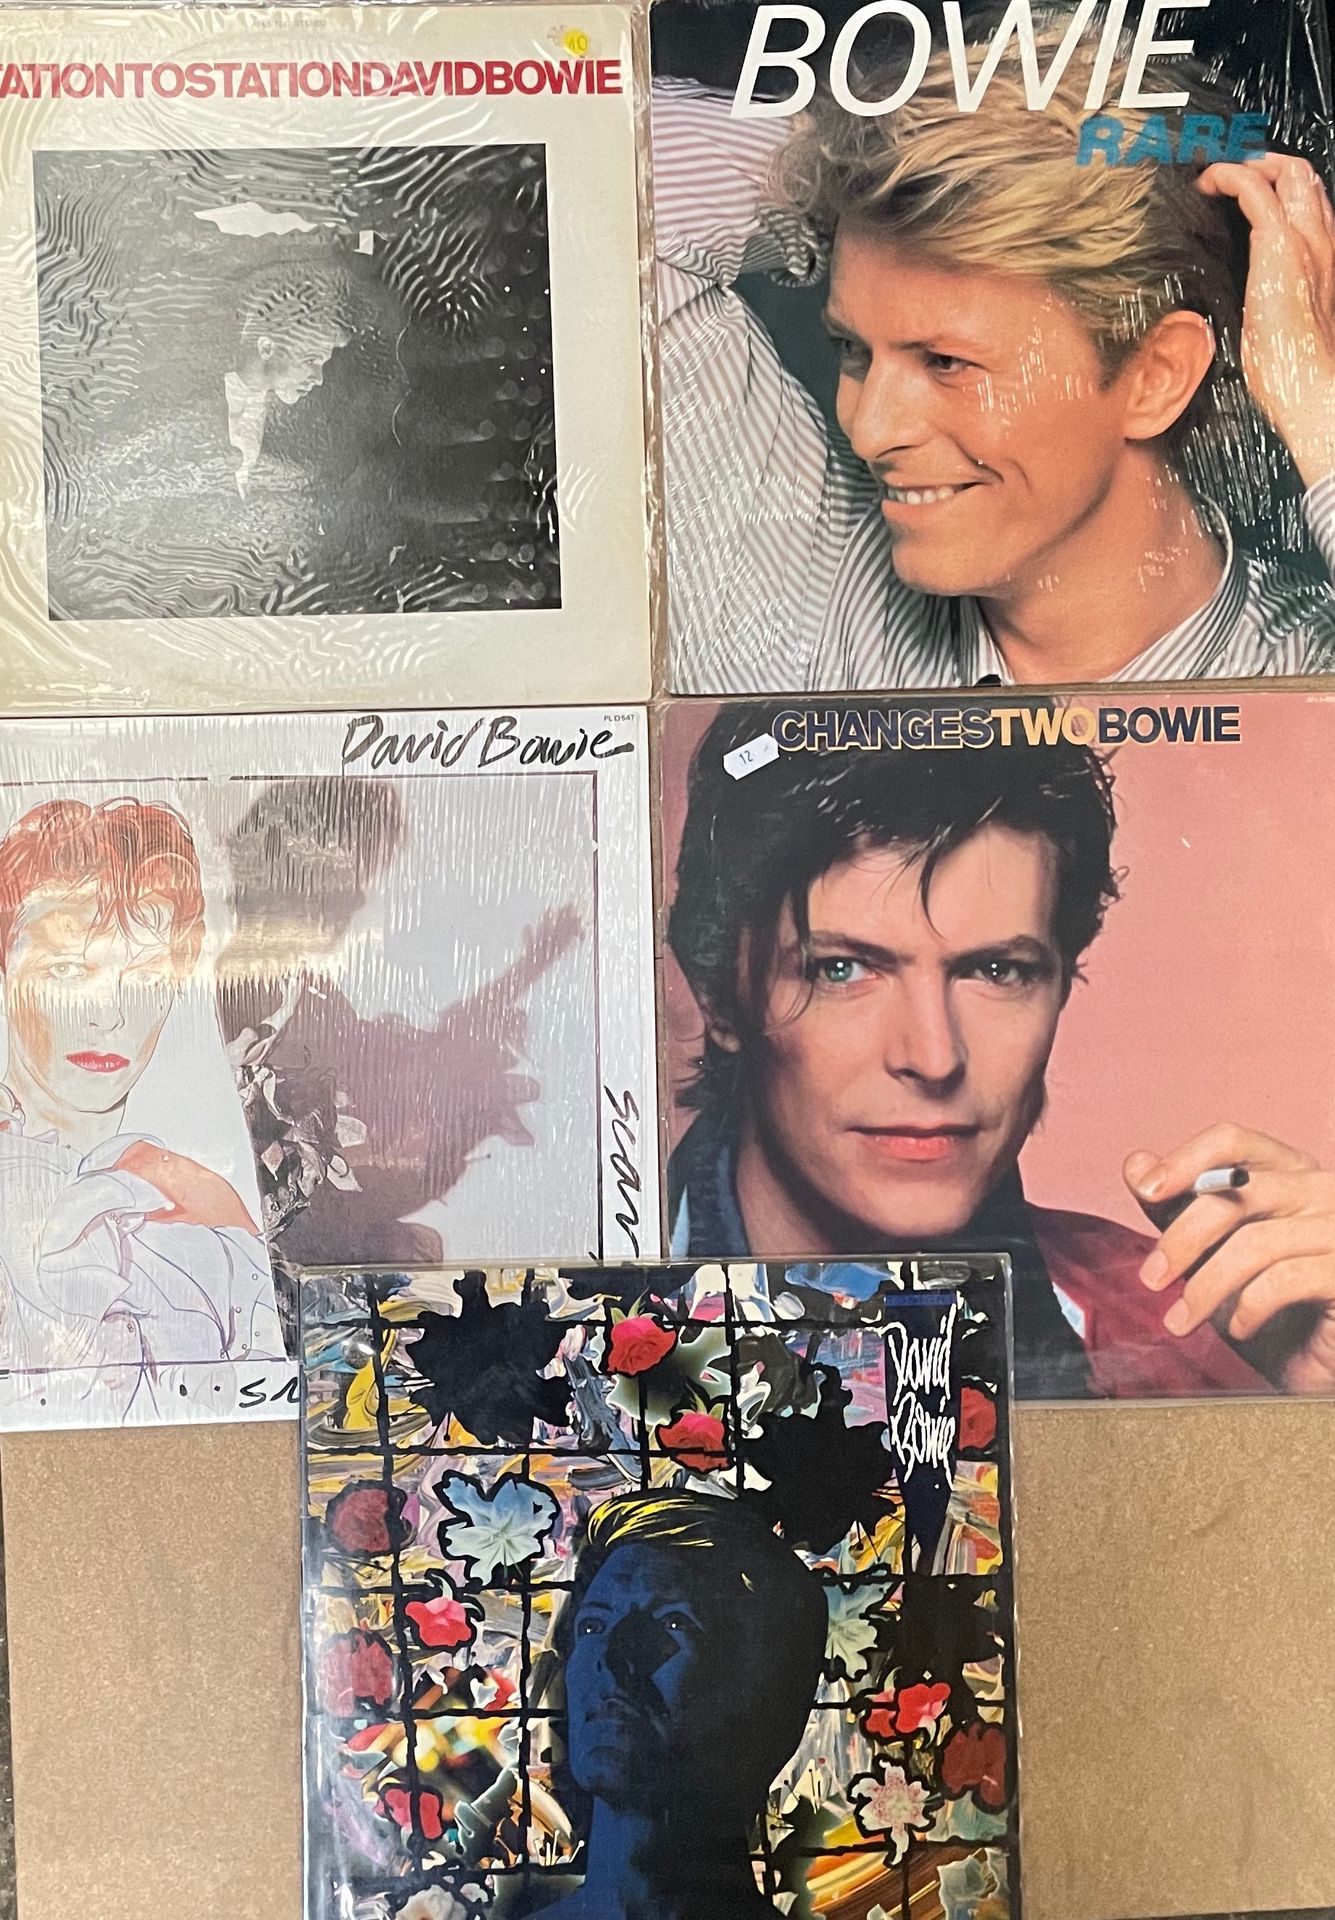 Null Five LPs - David Bowie

VG+ to EX; VG+ to EX